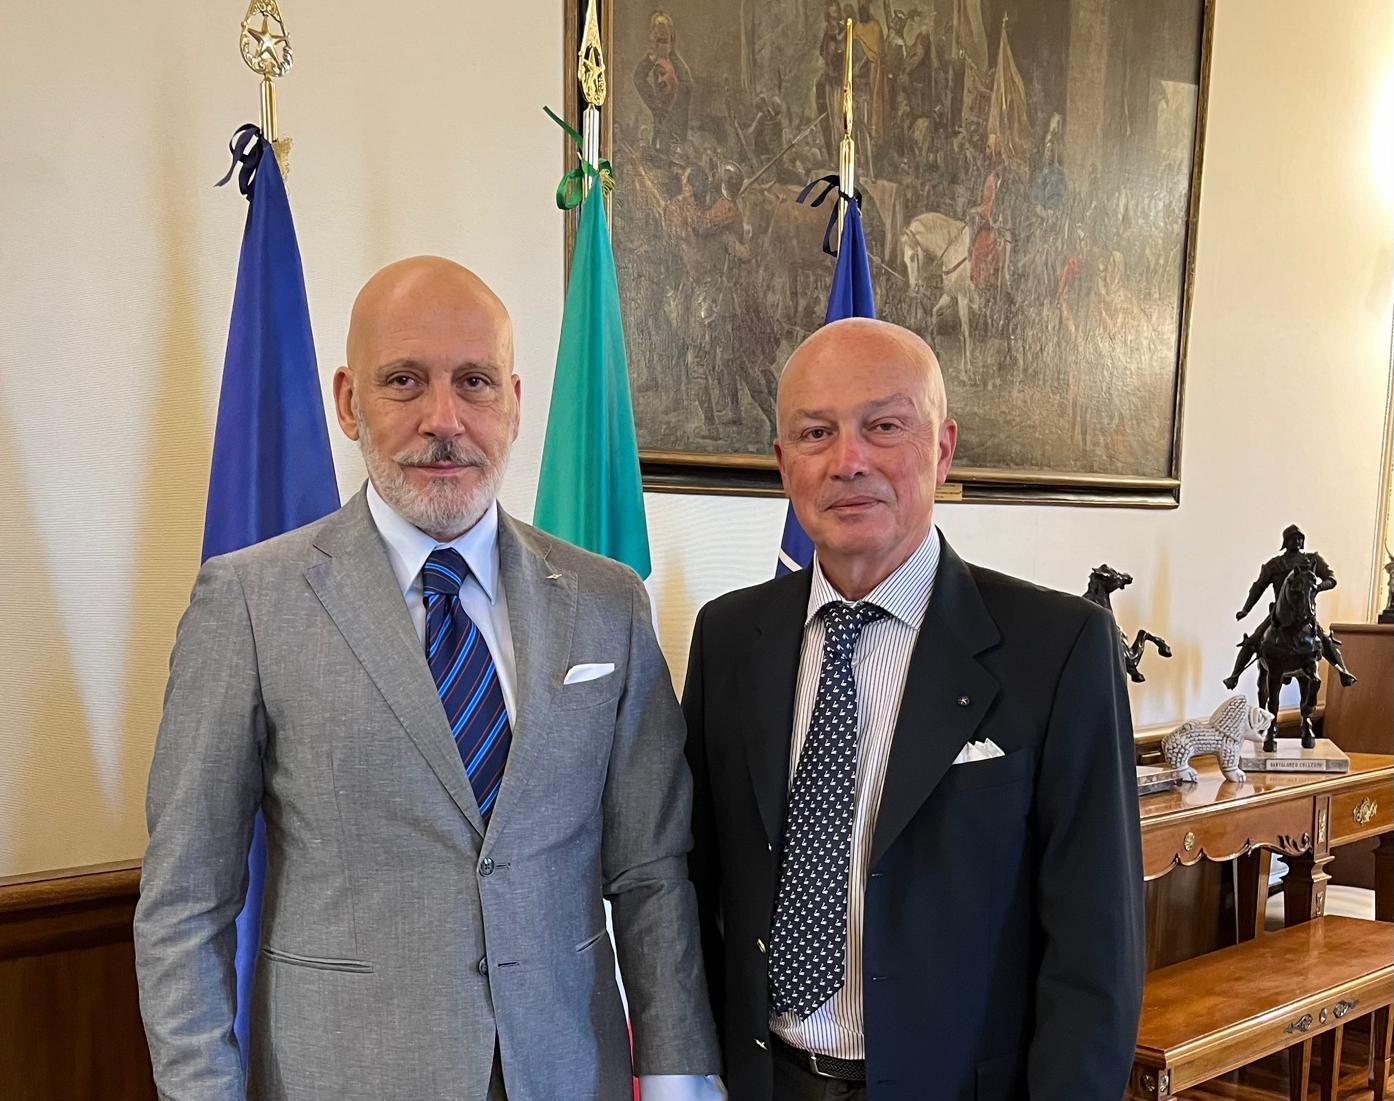 The President visits the Italian Chief of Defence Admiral Giuseppe Cavo Dragone